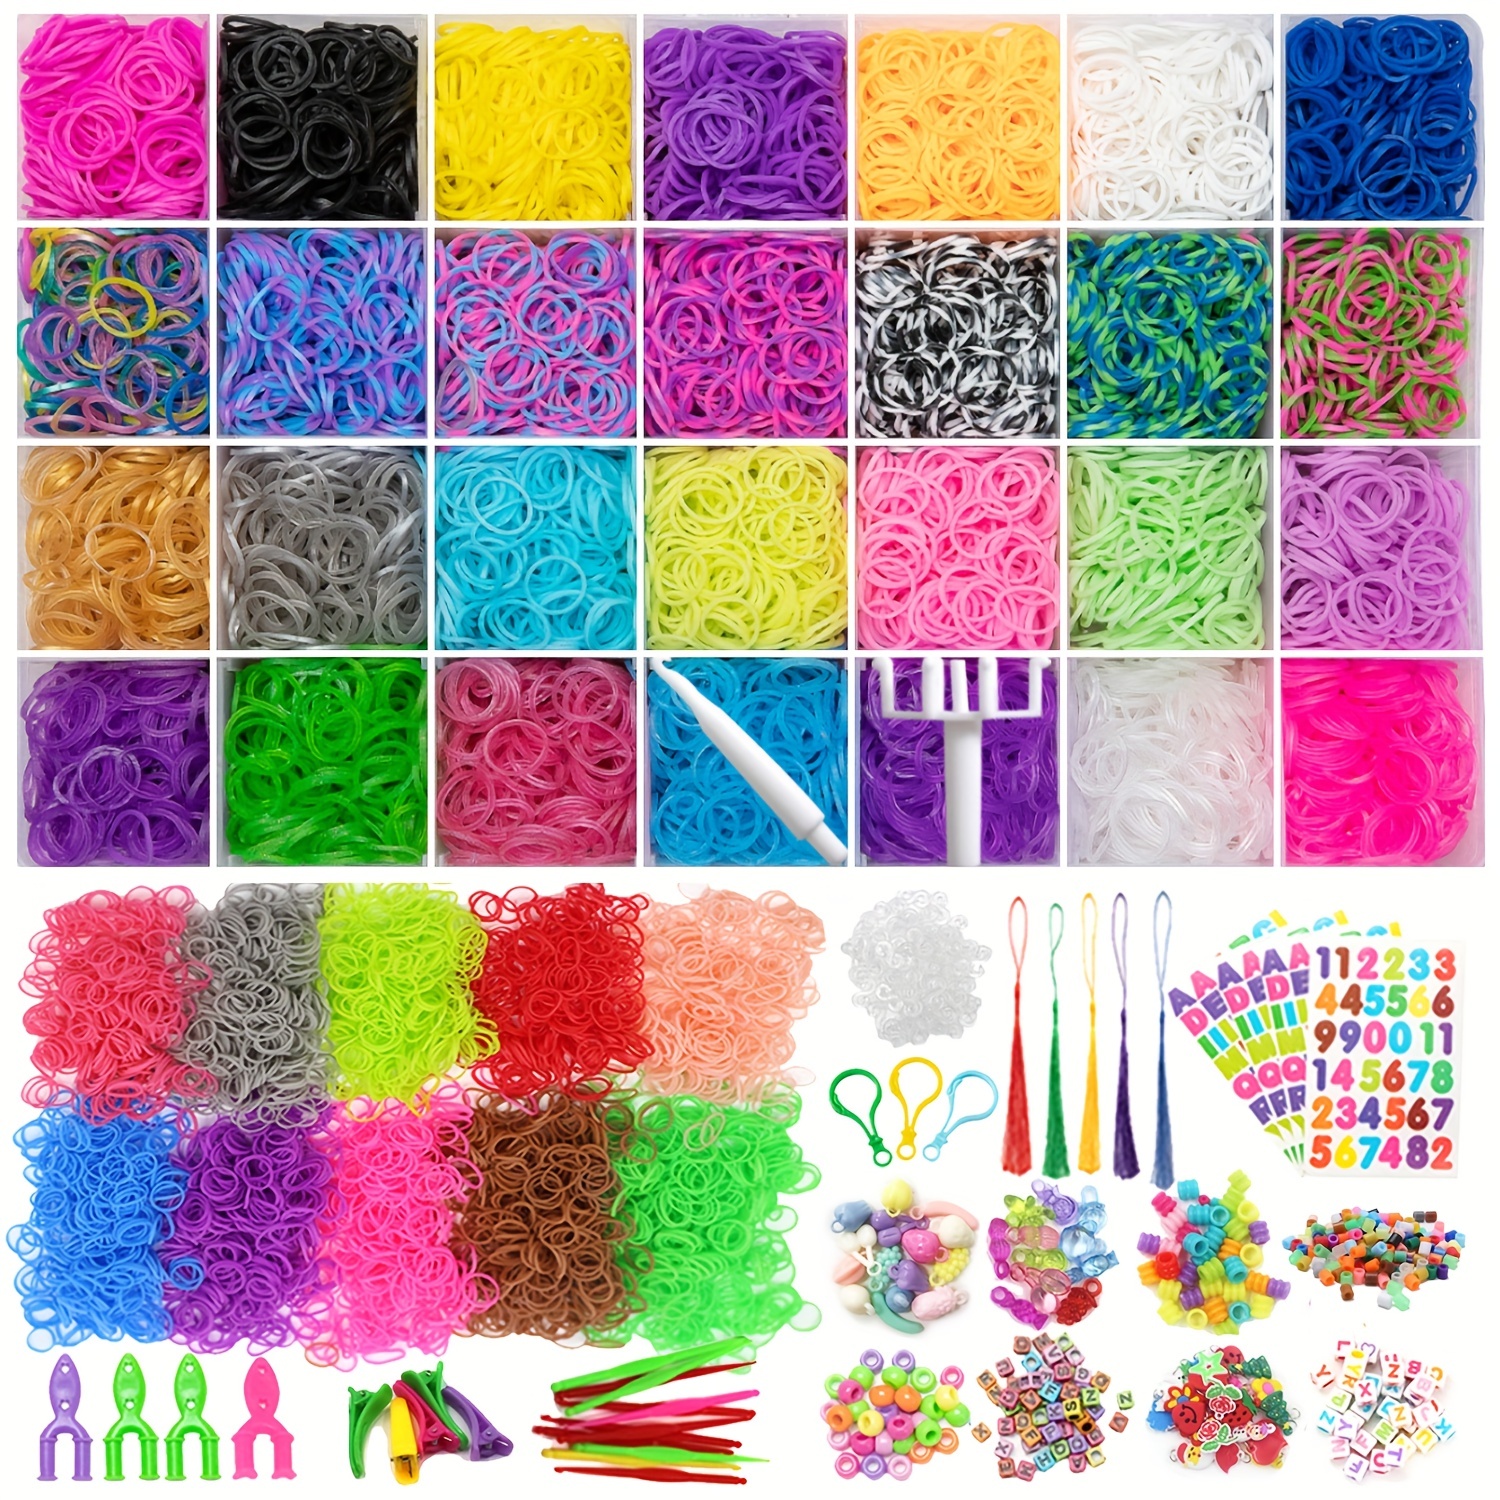 Complete Loom Bands Kits] The crochet kit is up to 2300PCS and 32